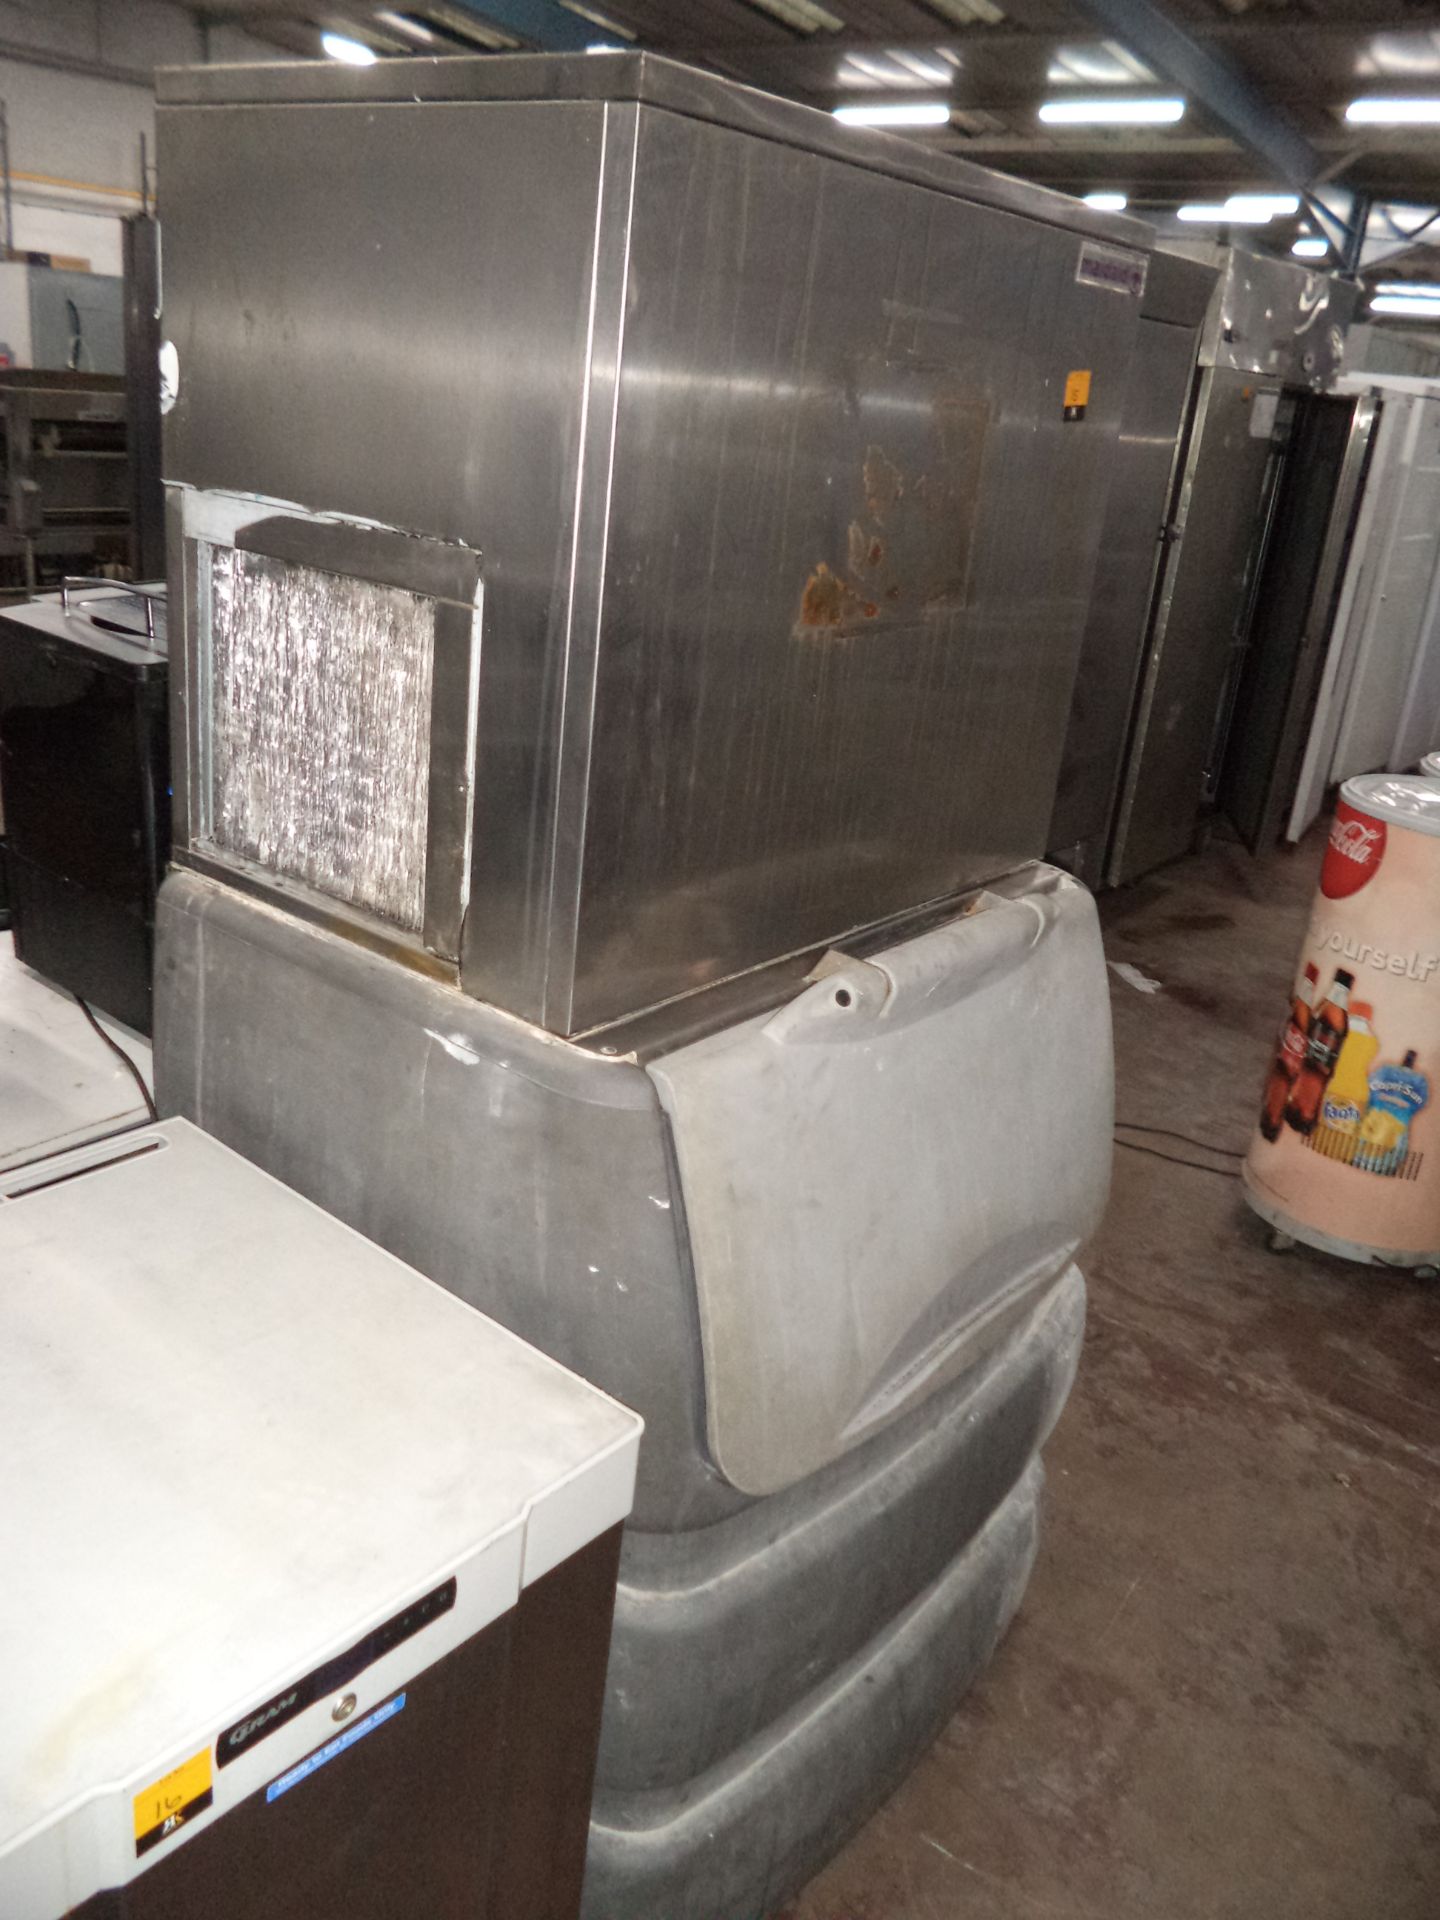 Maidaid stainless steel large floor standing commercial ice maker model MC150AICEMAKER IMPORTANT: - Image 2 of 4